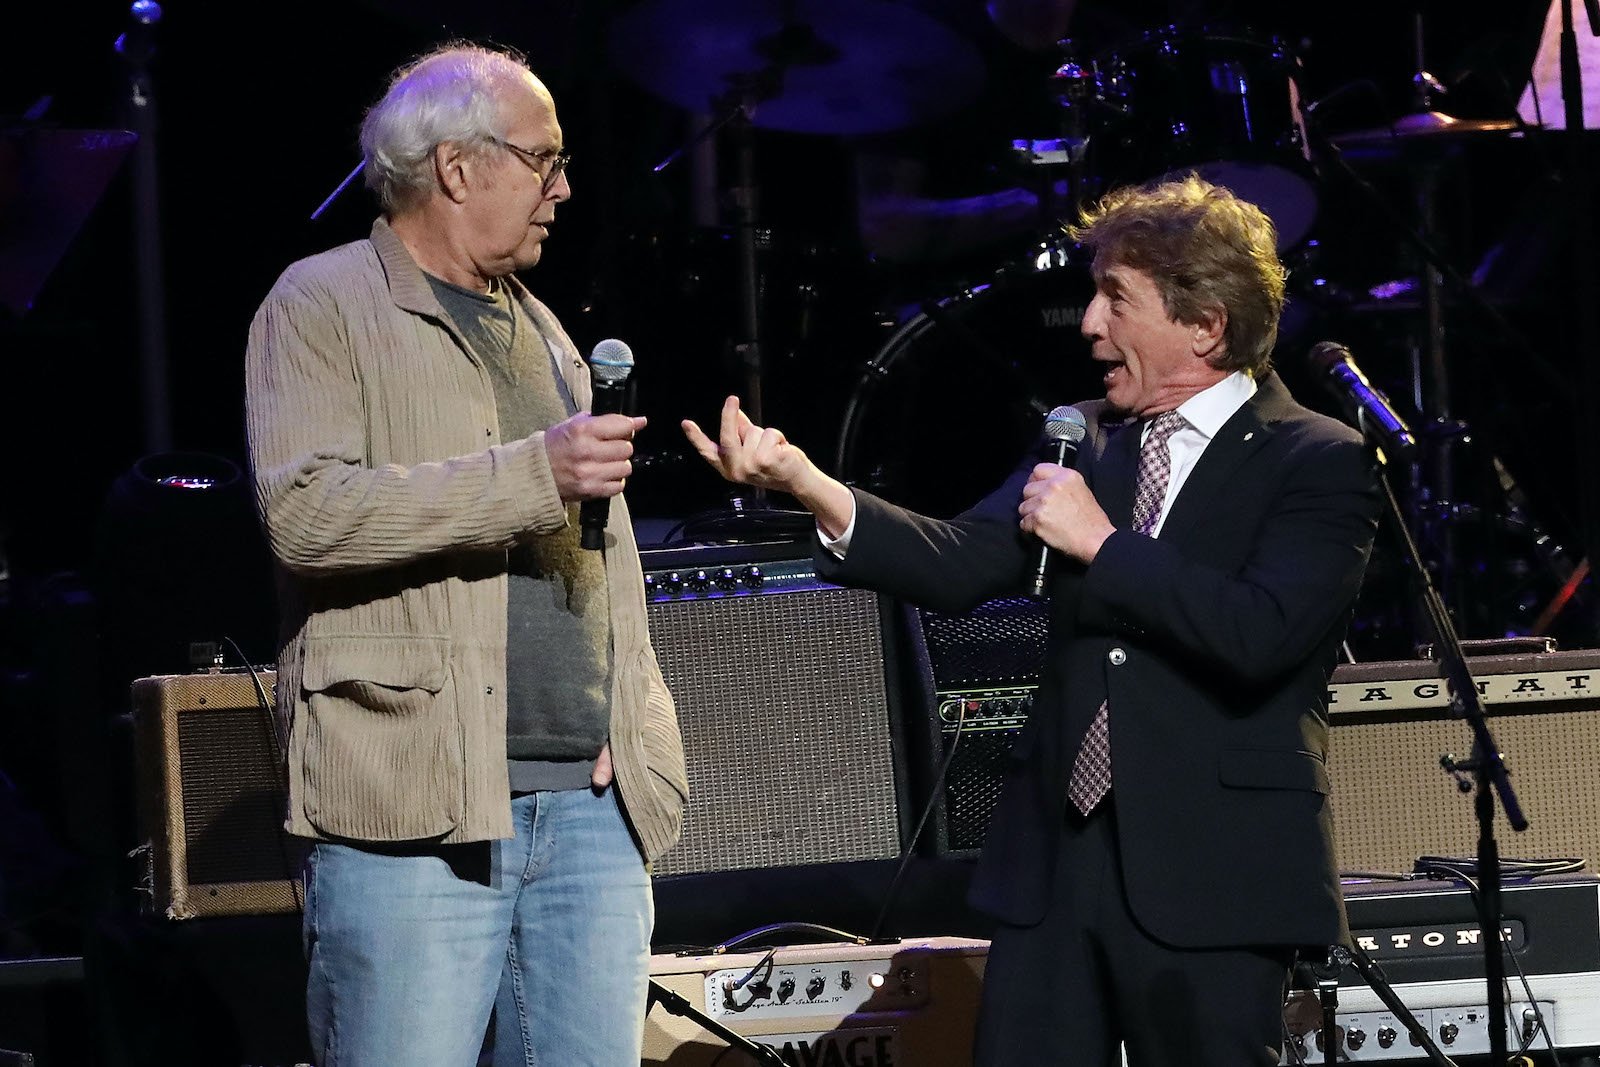 Chevy Chase and Martin Short perform together on stage